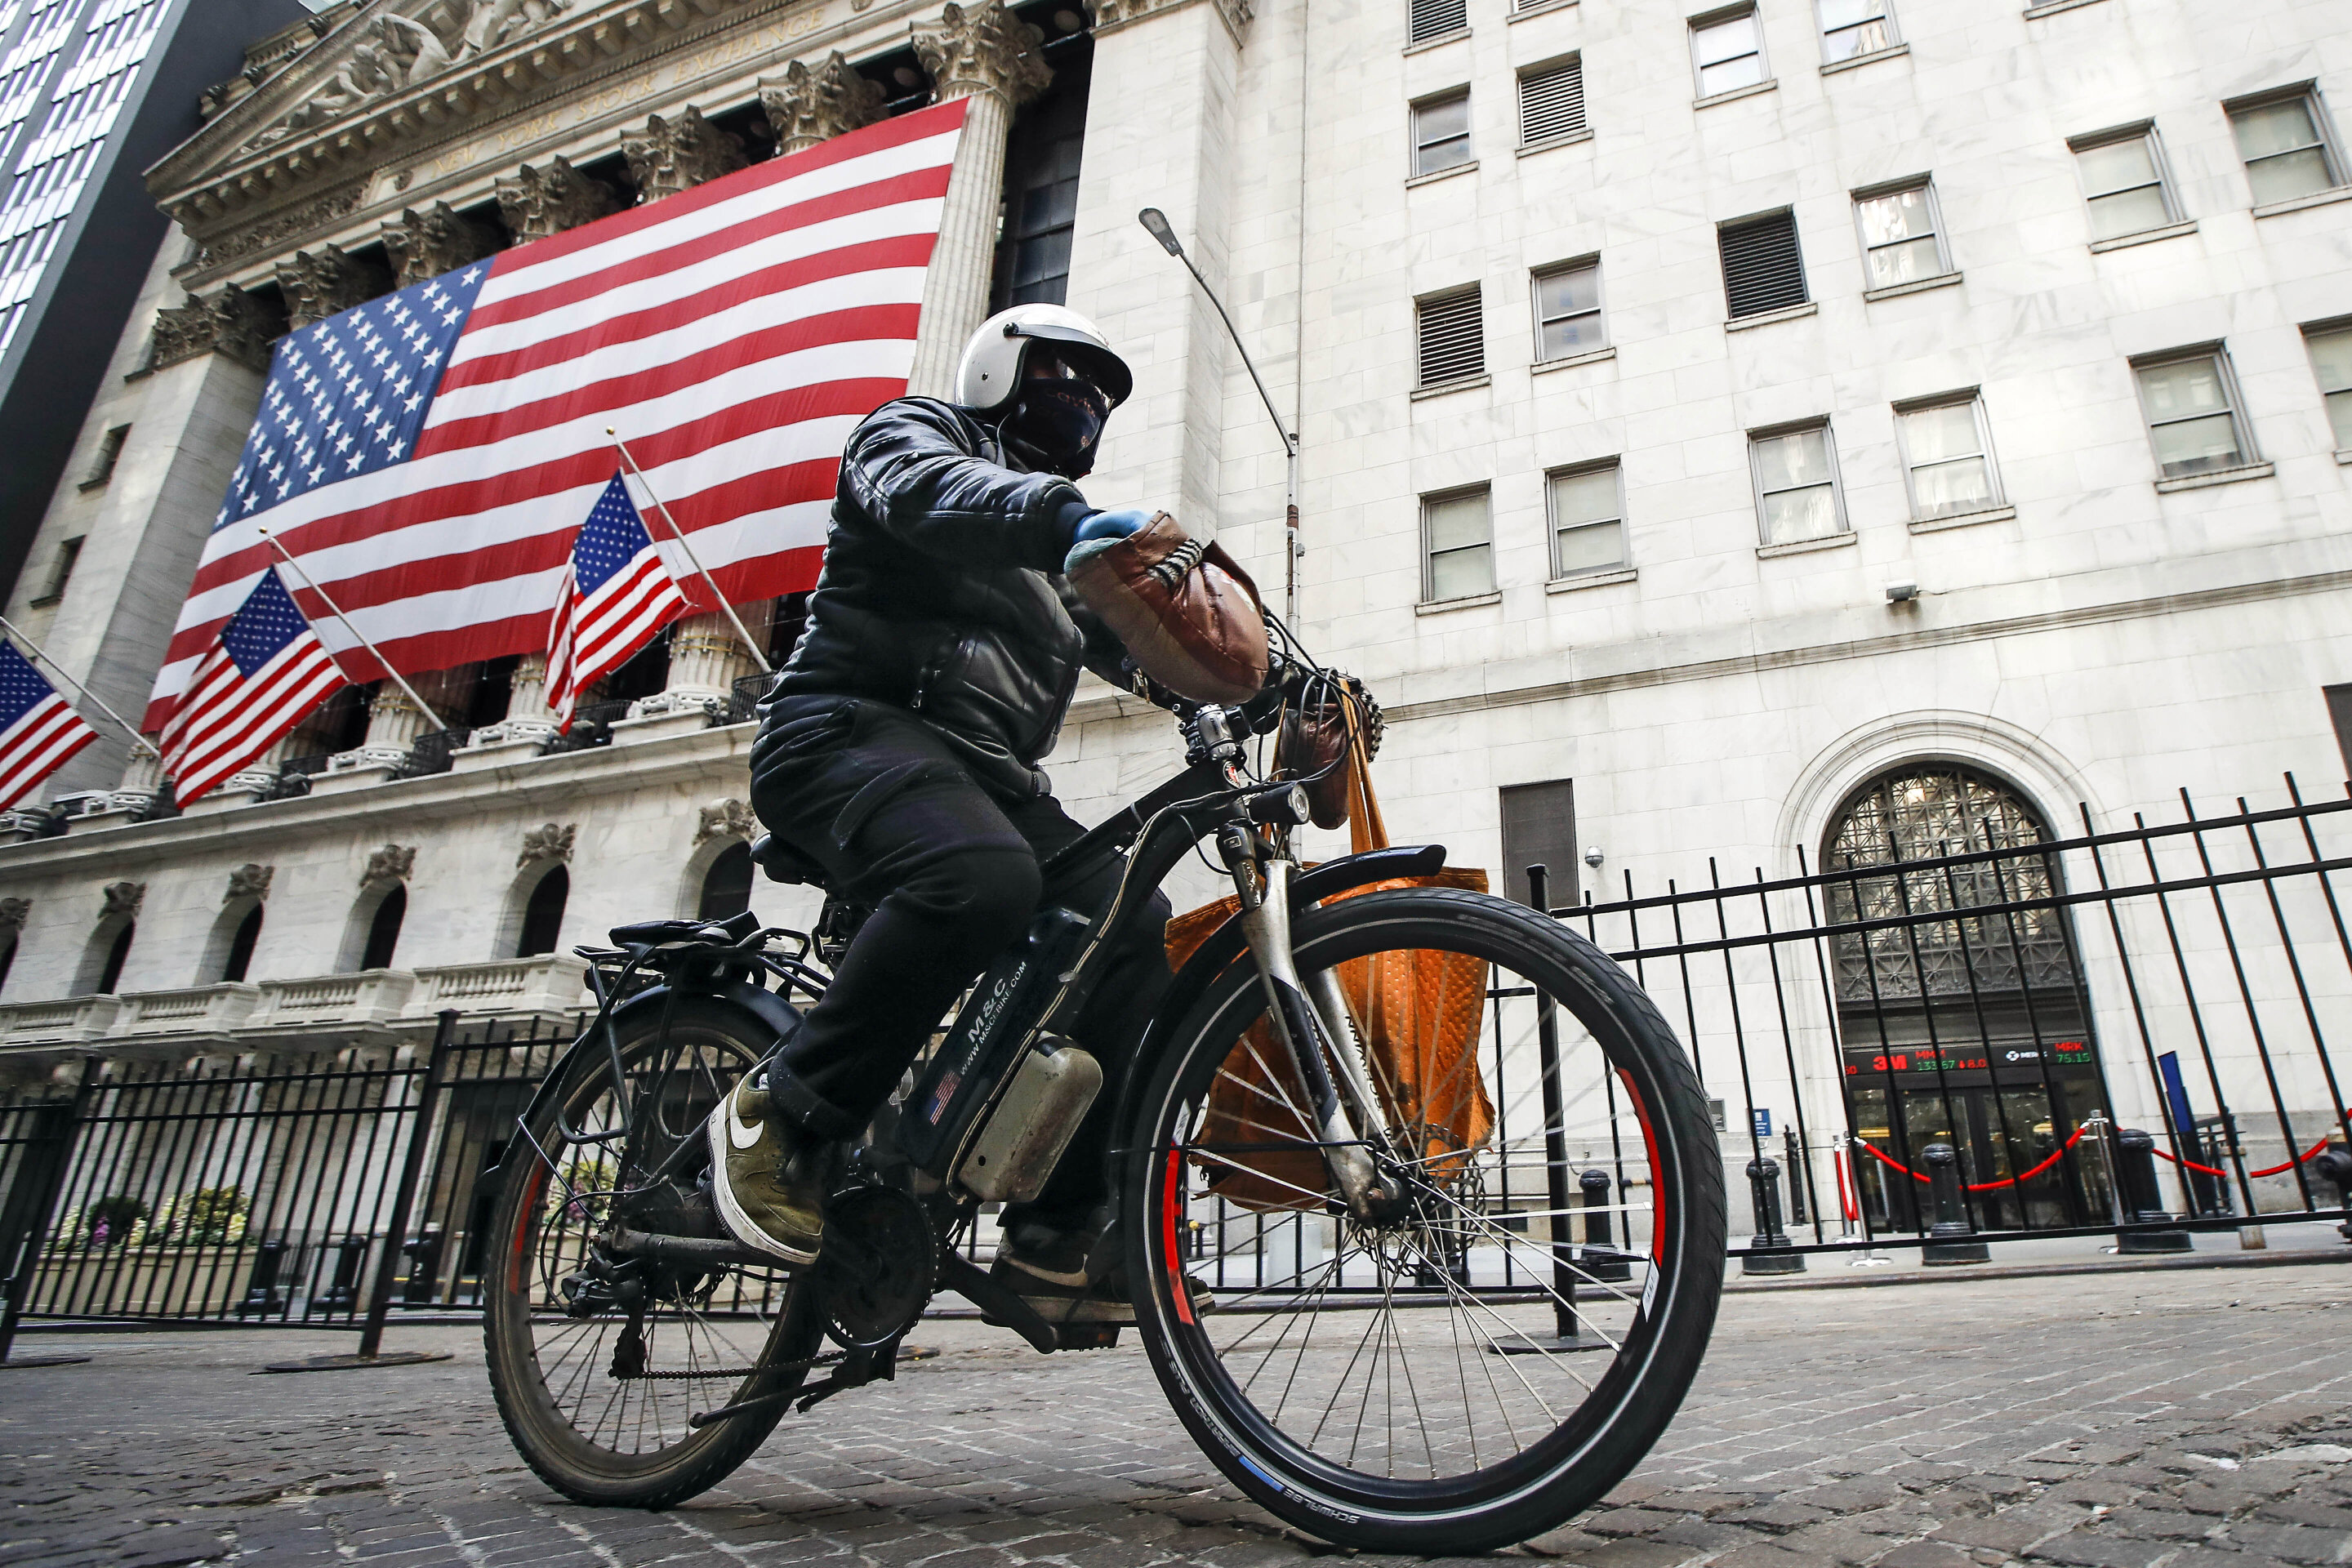 #E-bike batteries blamed for 22 NYC fires, 2 deaths this year